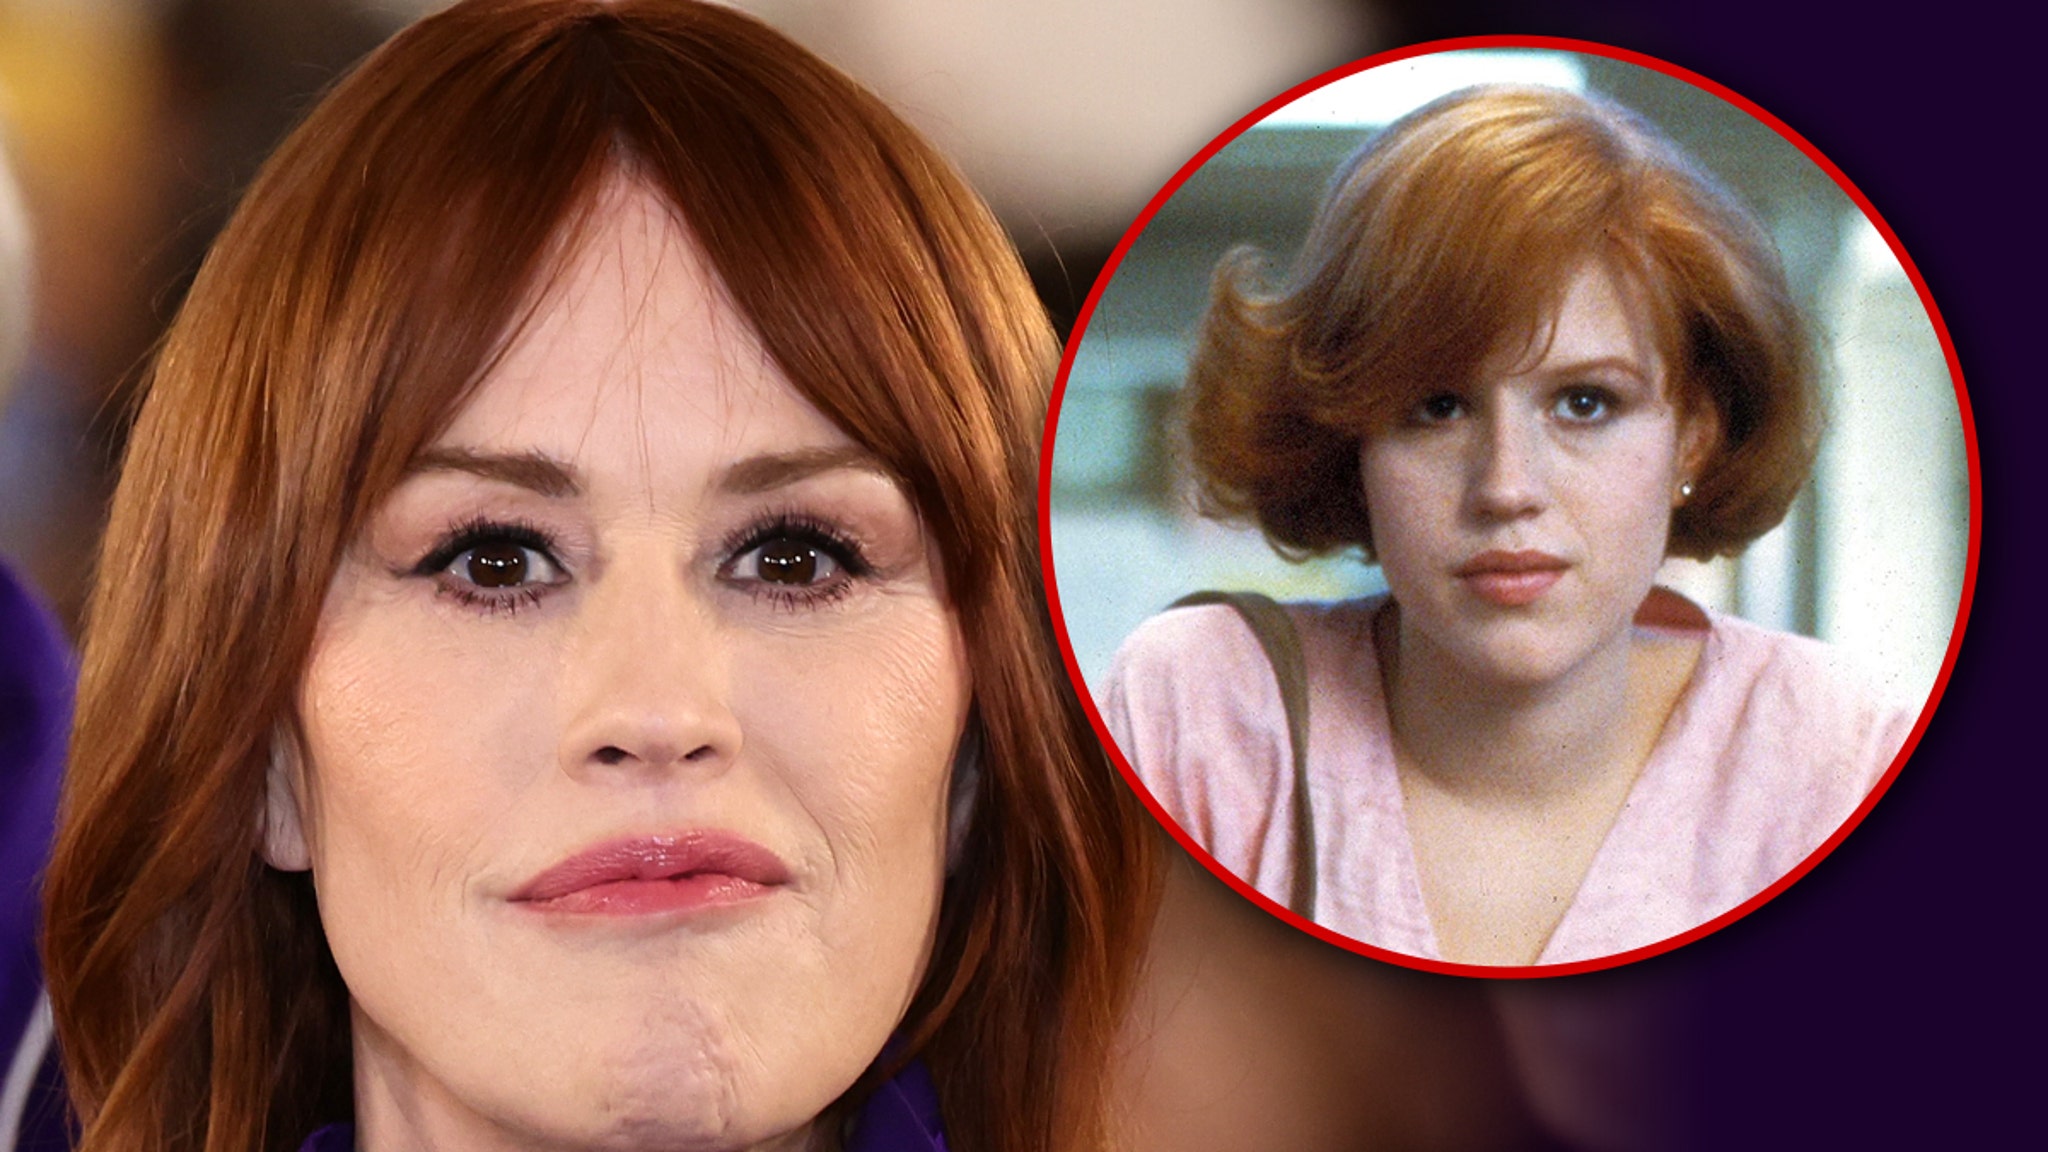 Molly Ringwald Details Being 'Taken Advantage of' By 'Predators'